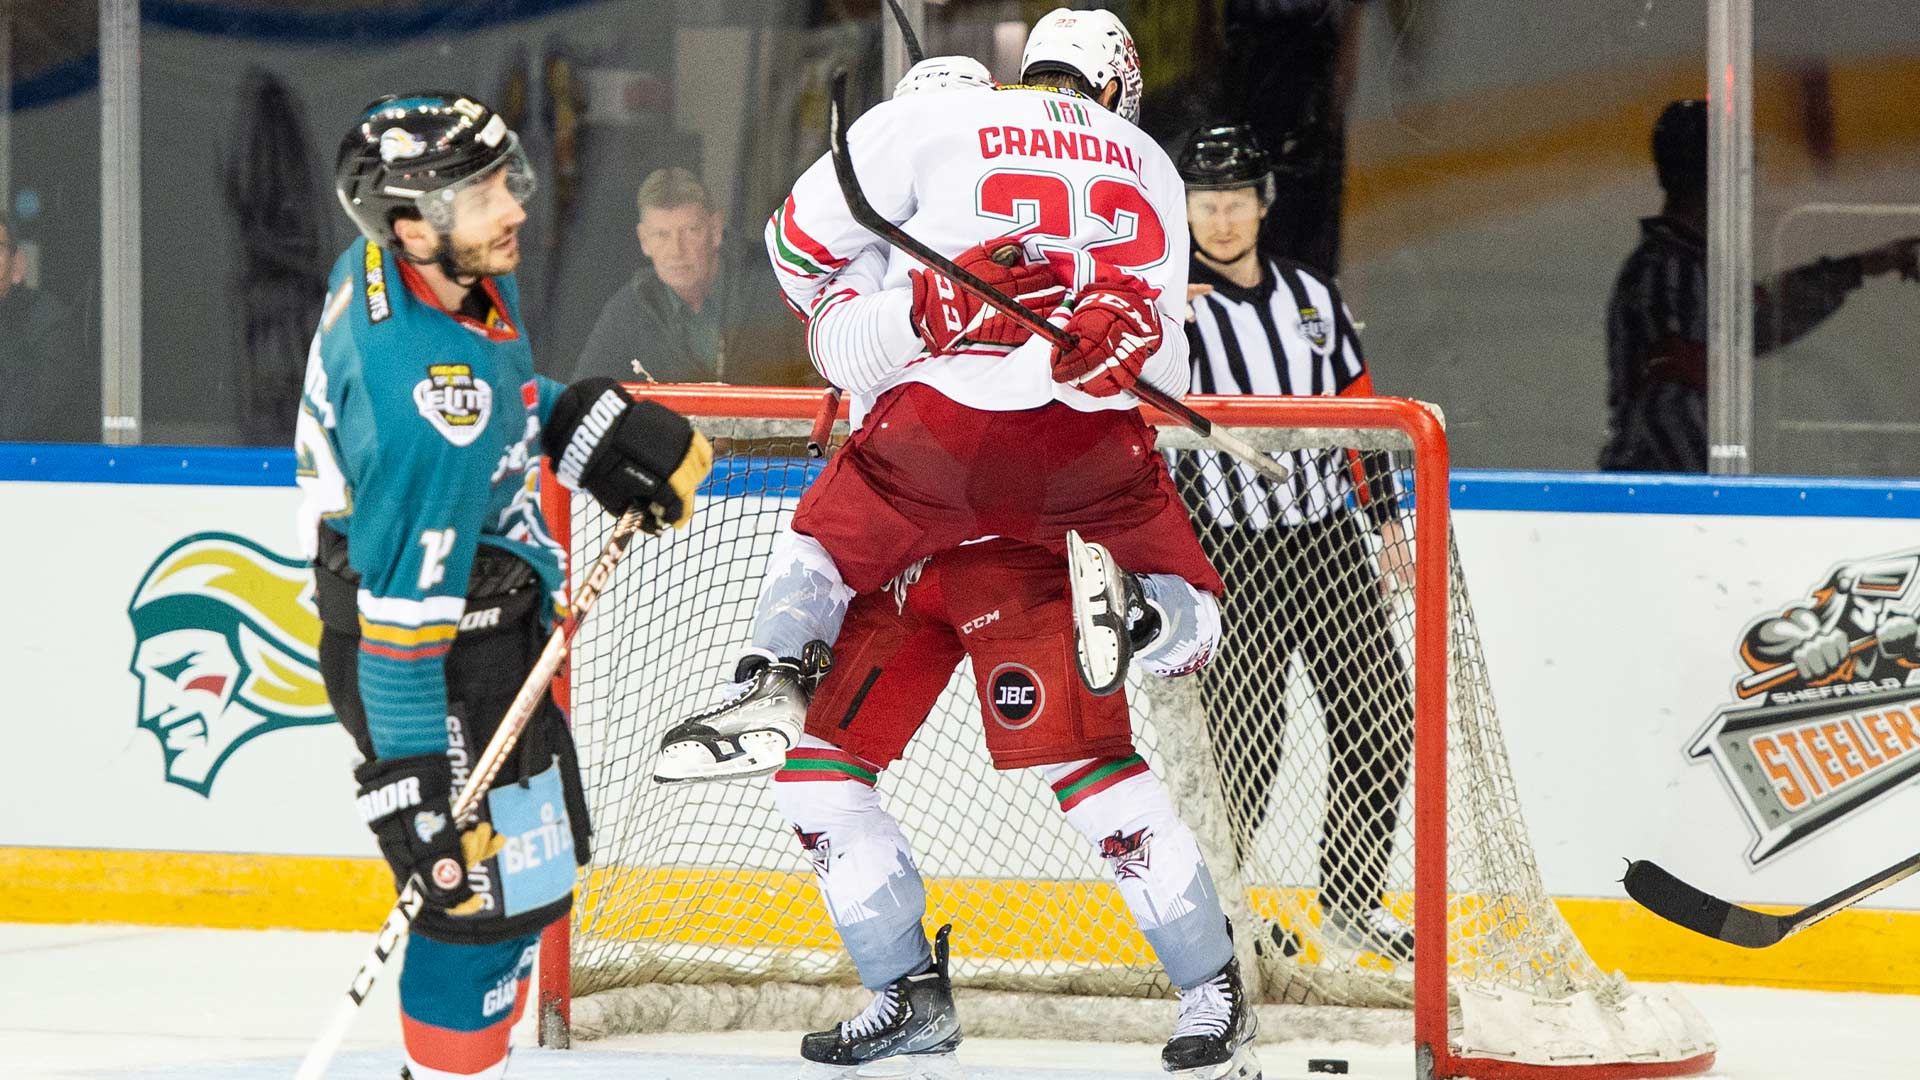 - Playoff Threepeat - Justin Crandall jumped for joy after scoring in the 2021-22 Elite League Playoff Final (Image: James Assinder)